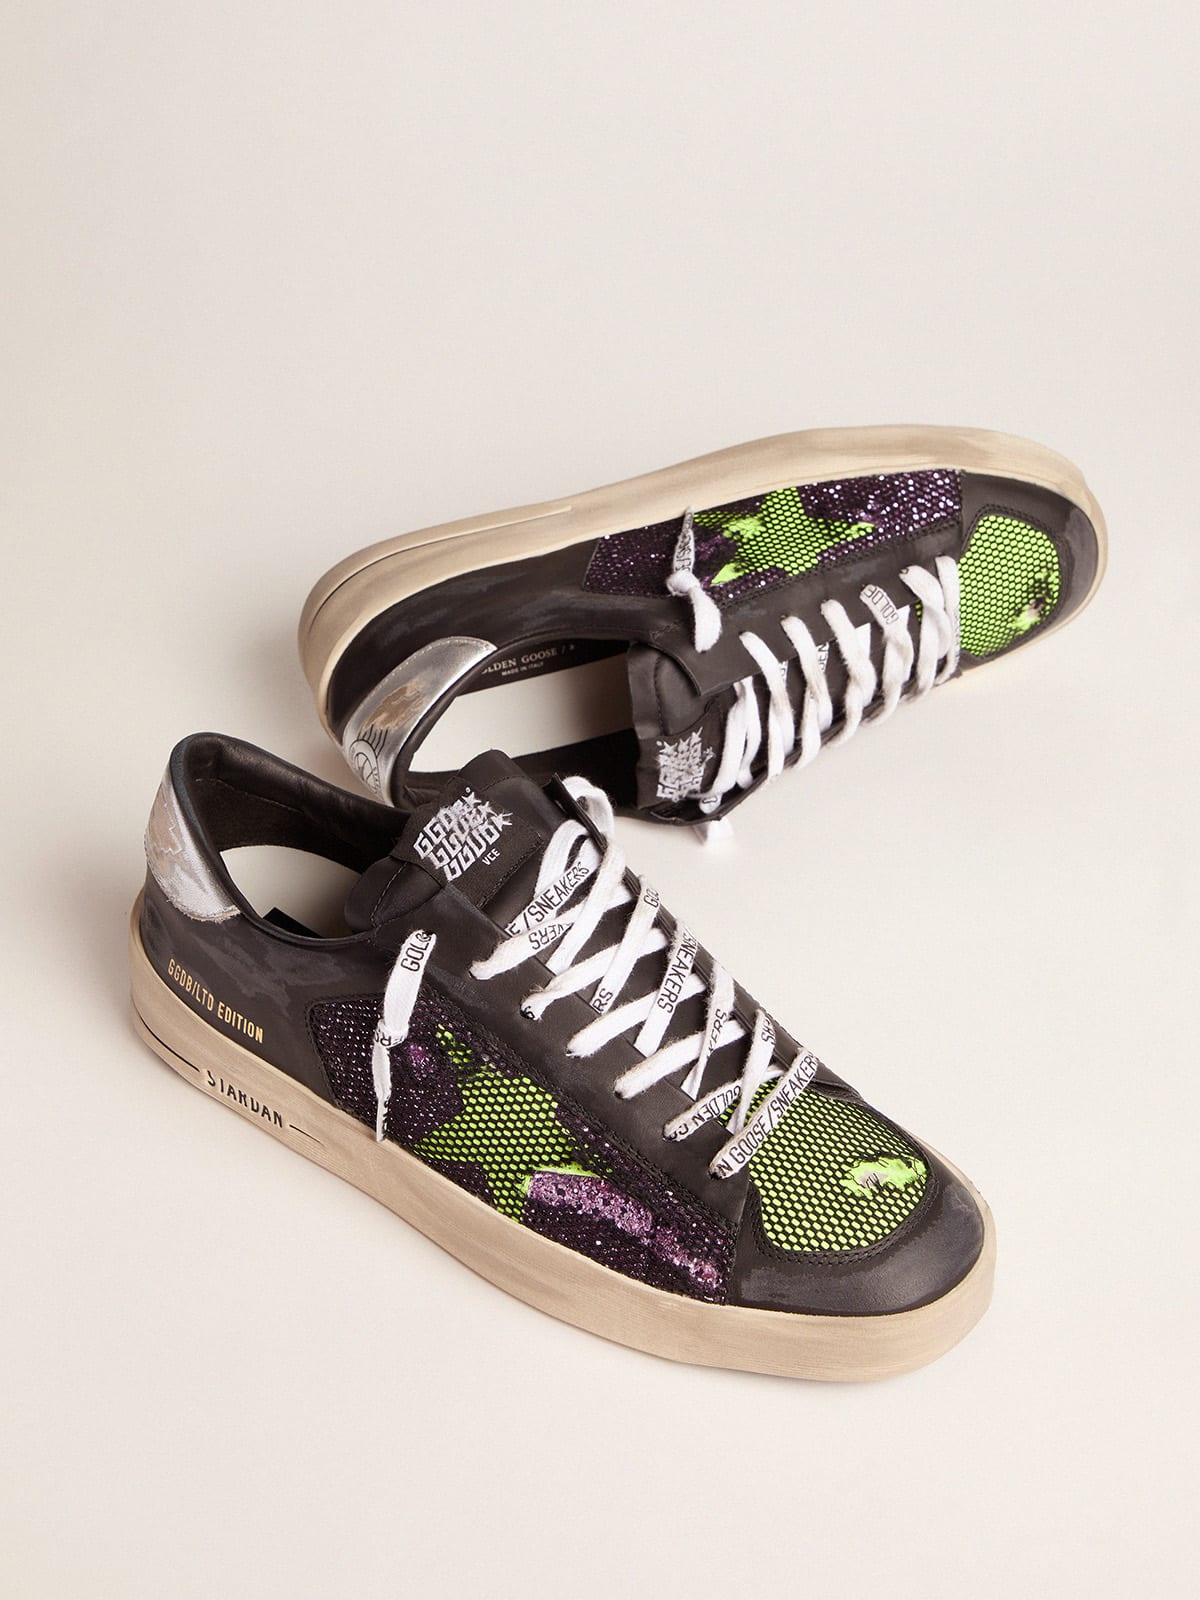 Golden Goose - Men’s LAB Limited Edition Stardan sneakers with glitter and fluorescent yellow details in 